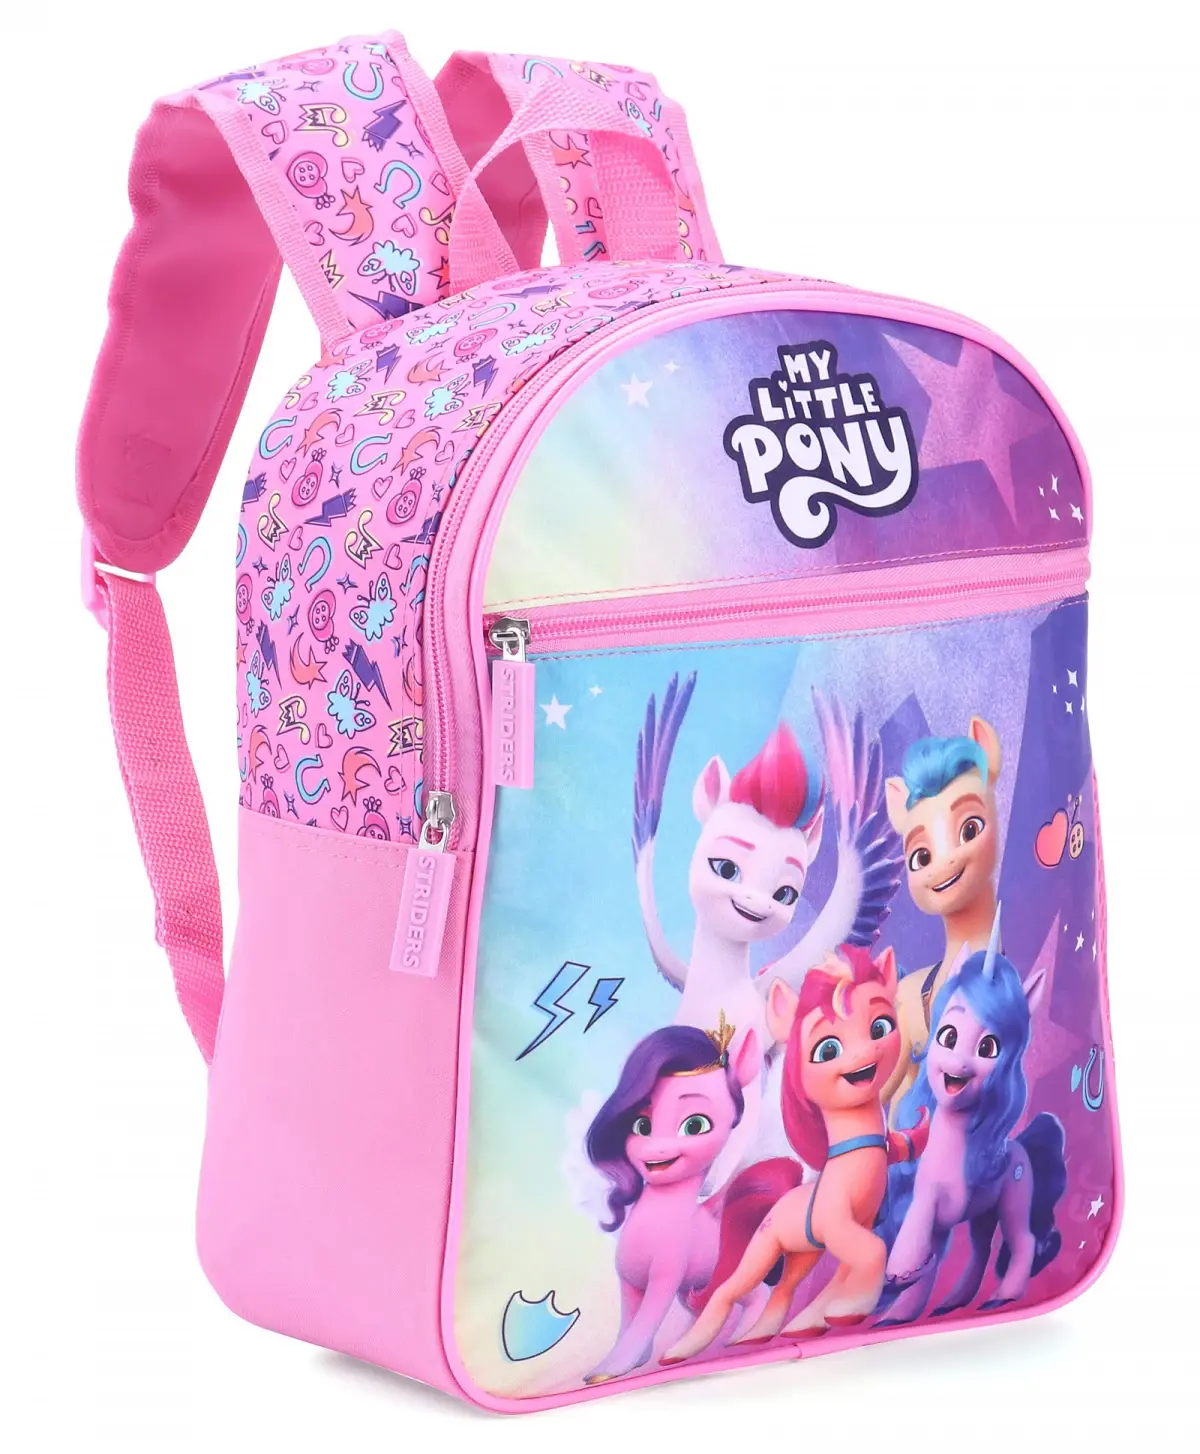 Striders 13 inches My Little Pony School Bag Magical Adventures for Young Dreamers Multicolor For Kids Ages 2Y+